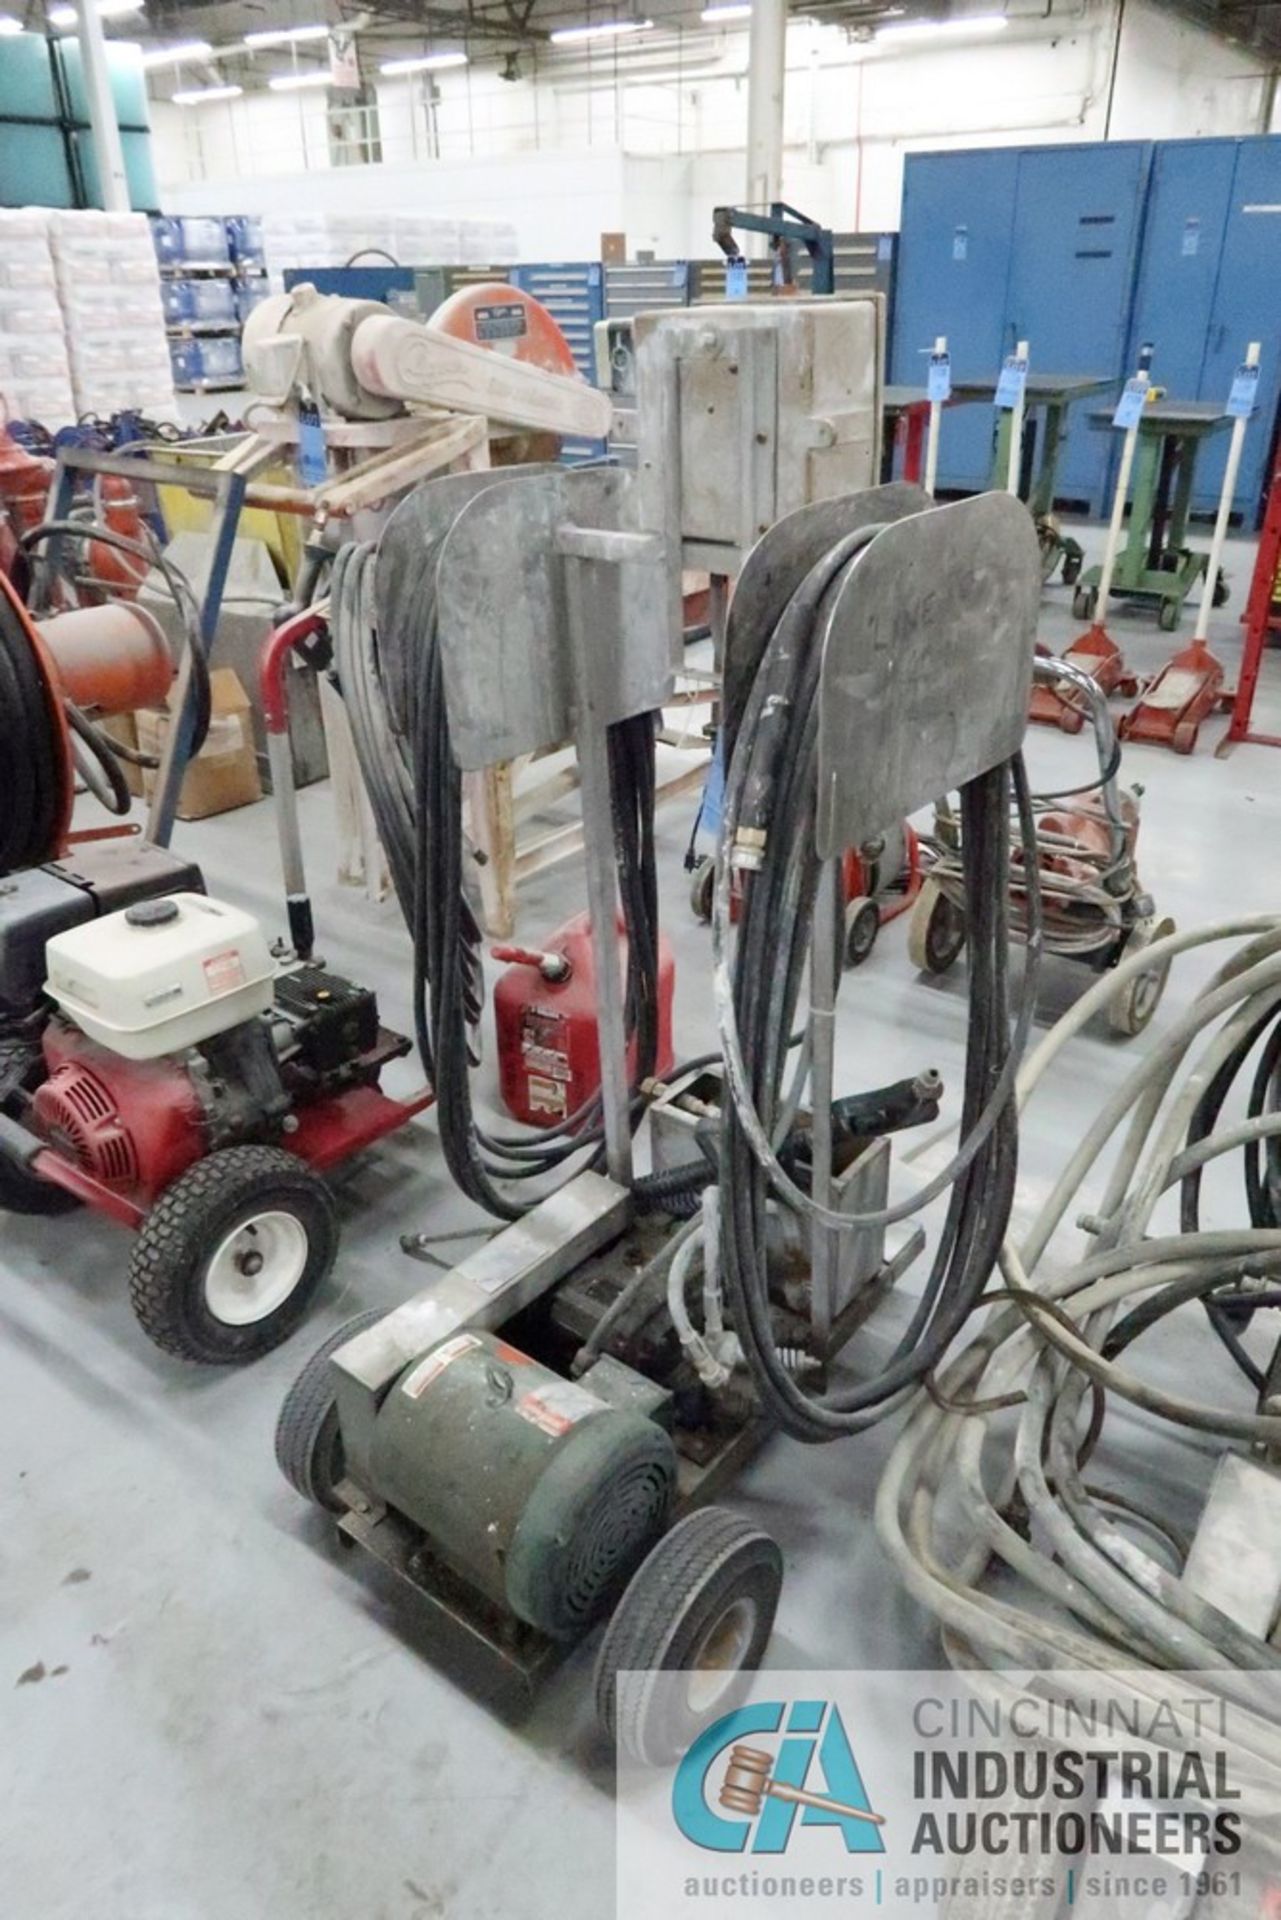 WHITCO MODEL 2418-EC ELECTRIC PORTABLE PRESSURE WASHER; S/N 300-101, 3-PHASE, 208 VOLTS, 3 HP - Image 2 of 3